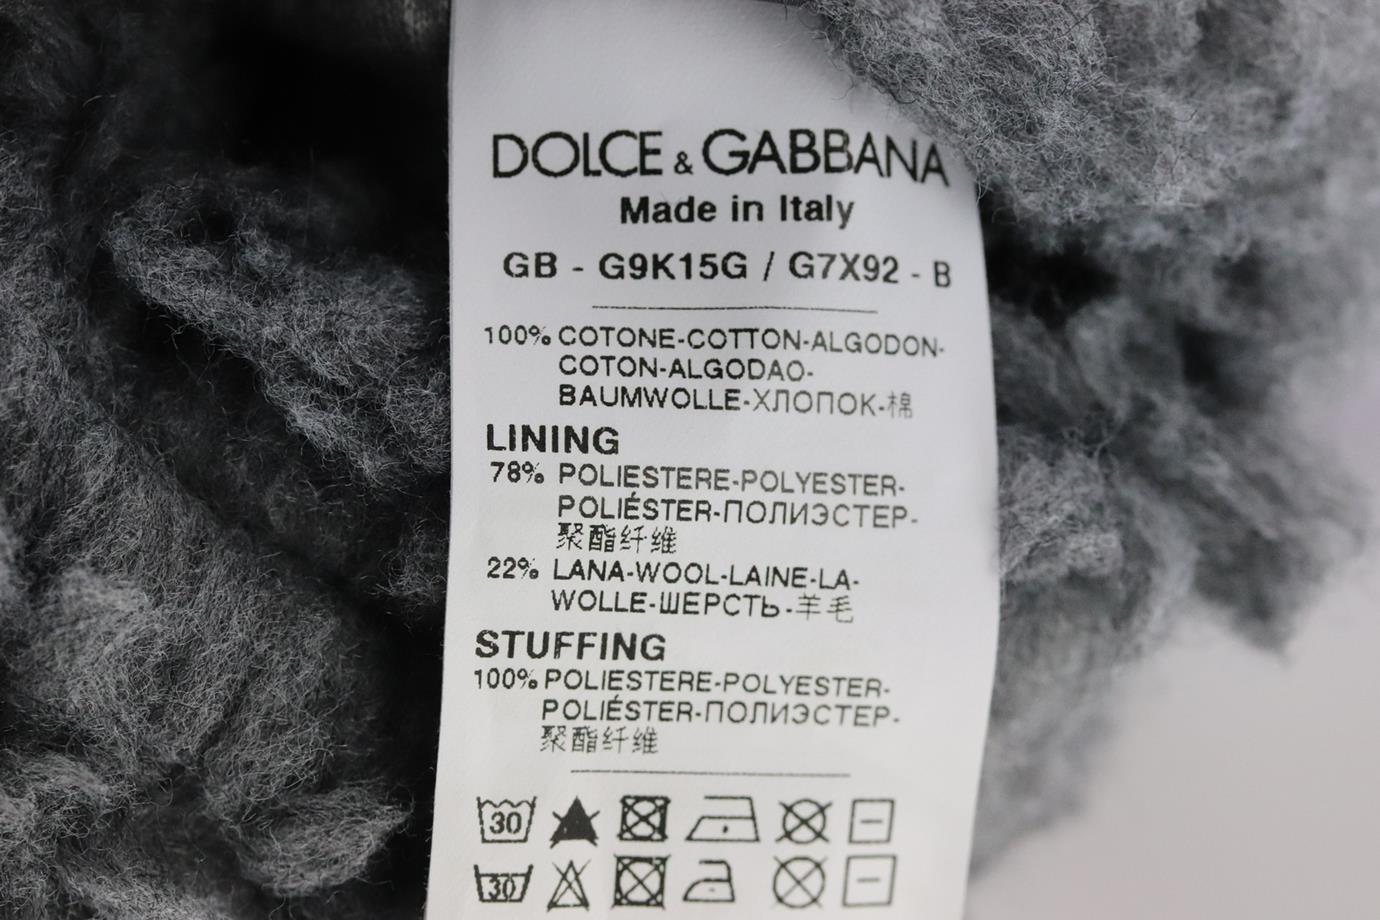 DOLCE AND GABBANA MEN'S FLEECE LINED COTTON HOODIE IT 50 UK/US CHEST 40